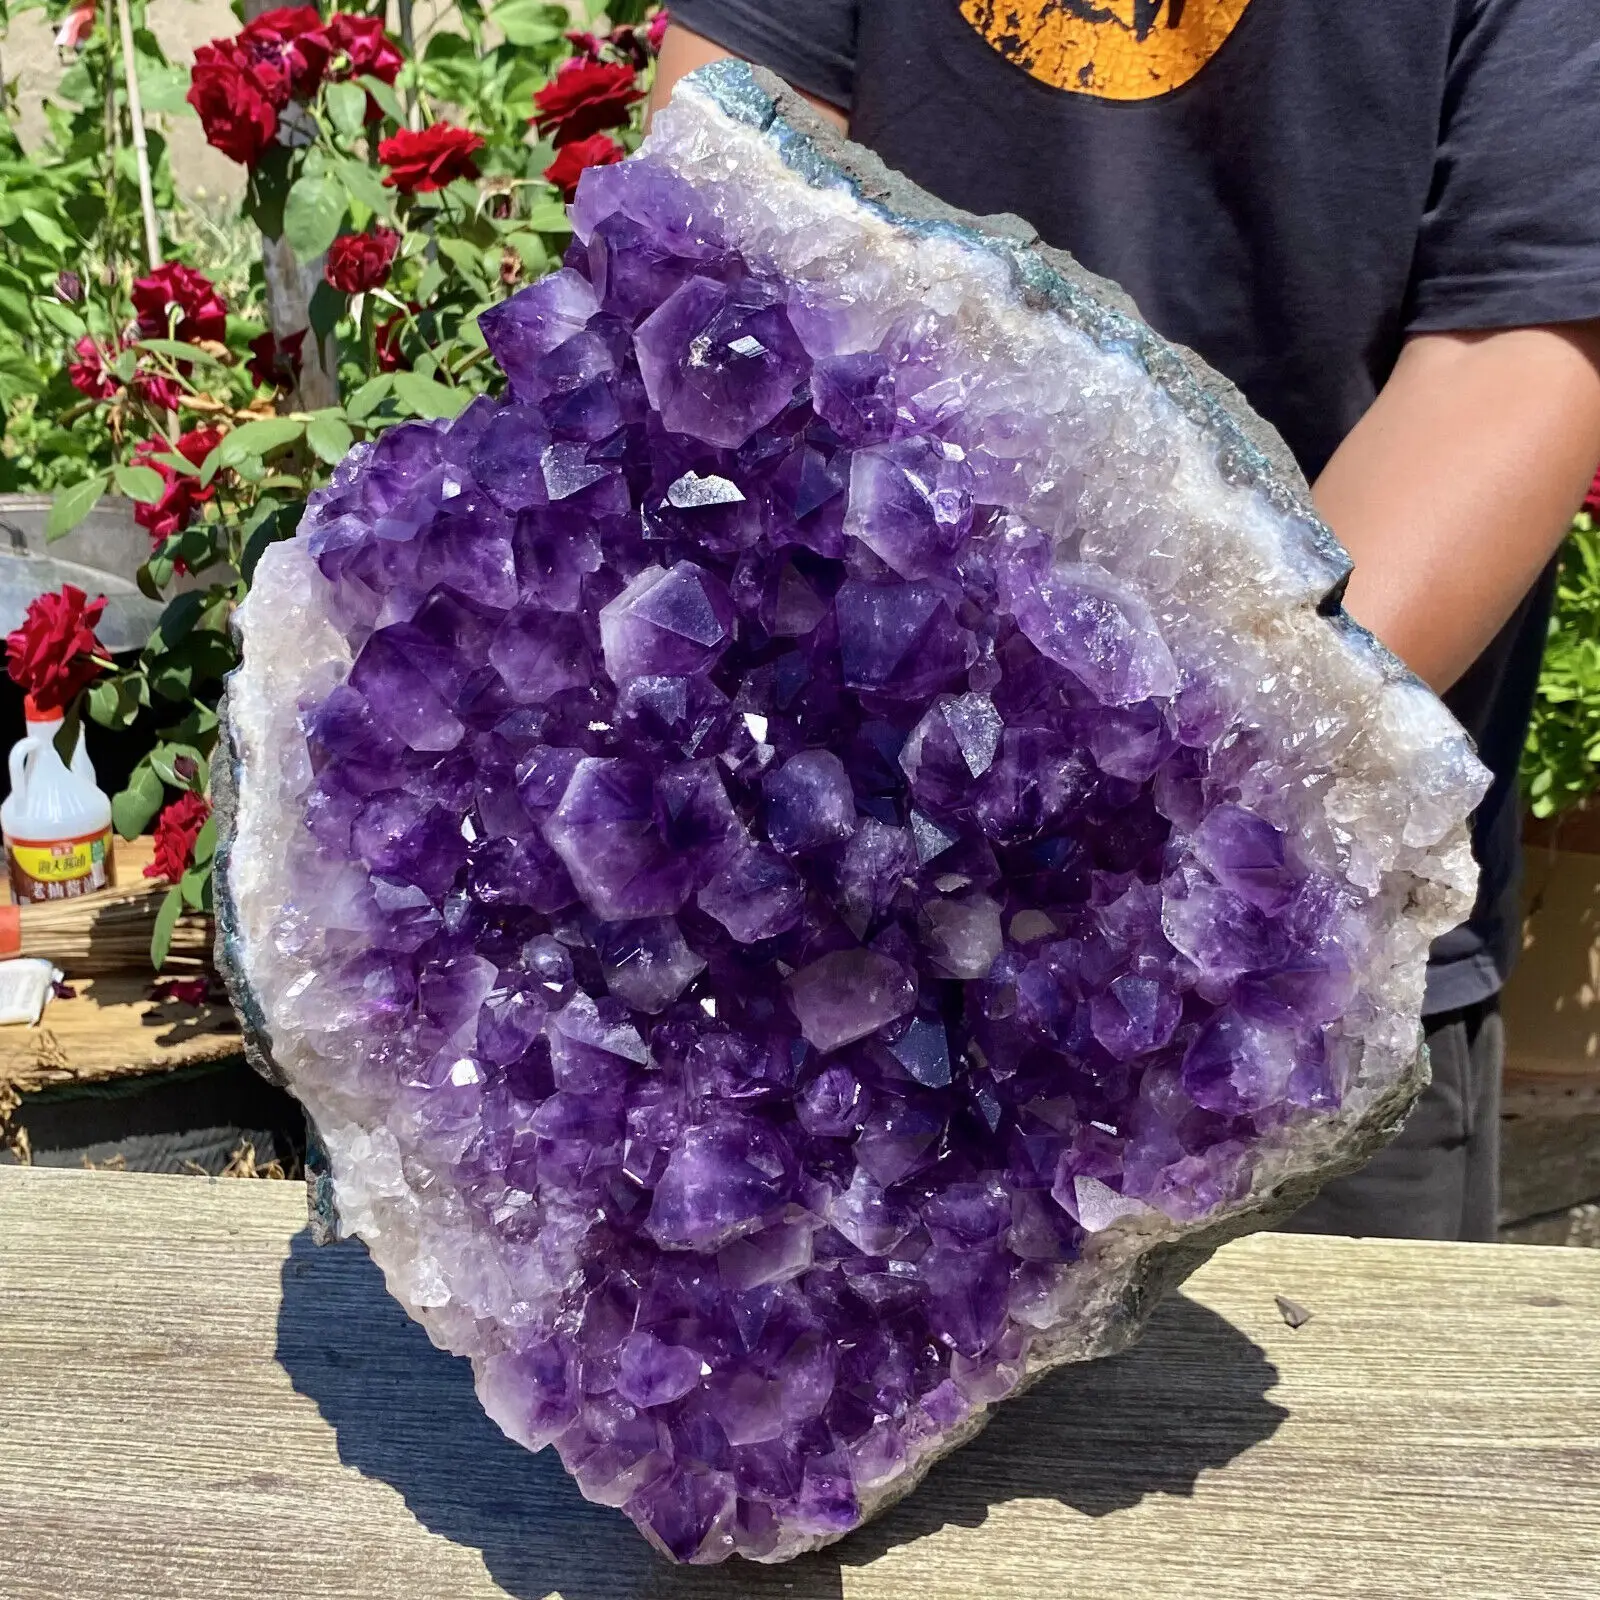 

AAA Magical Natural Purple Crystal Cluster, Quartz Crystal Mineral Crystal,Home Office Degaussing Decoration, Psychotherapy Gem